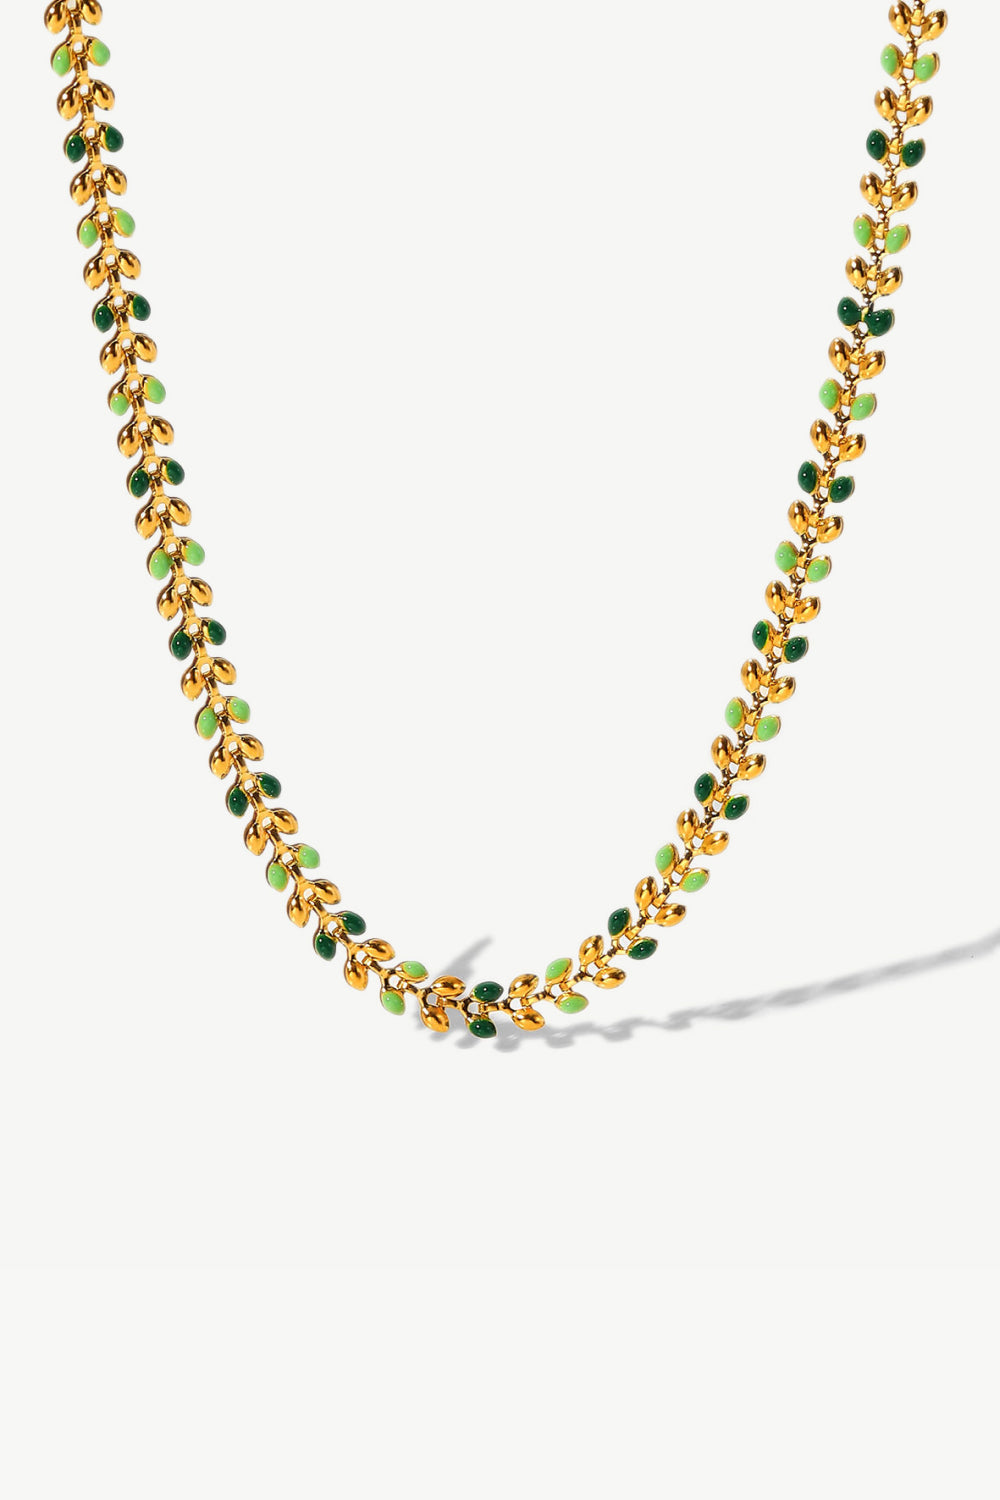 Leaf Chain Lobster Clasp Necklace - Necklaces - FITGGINS